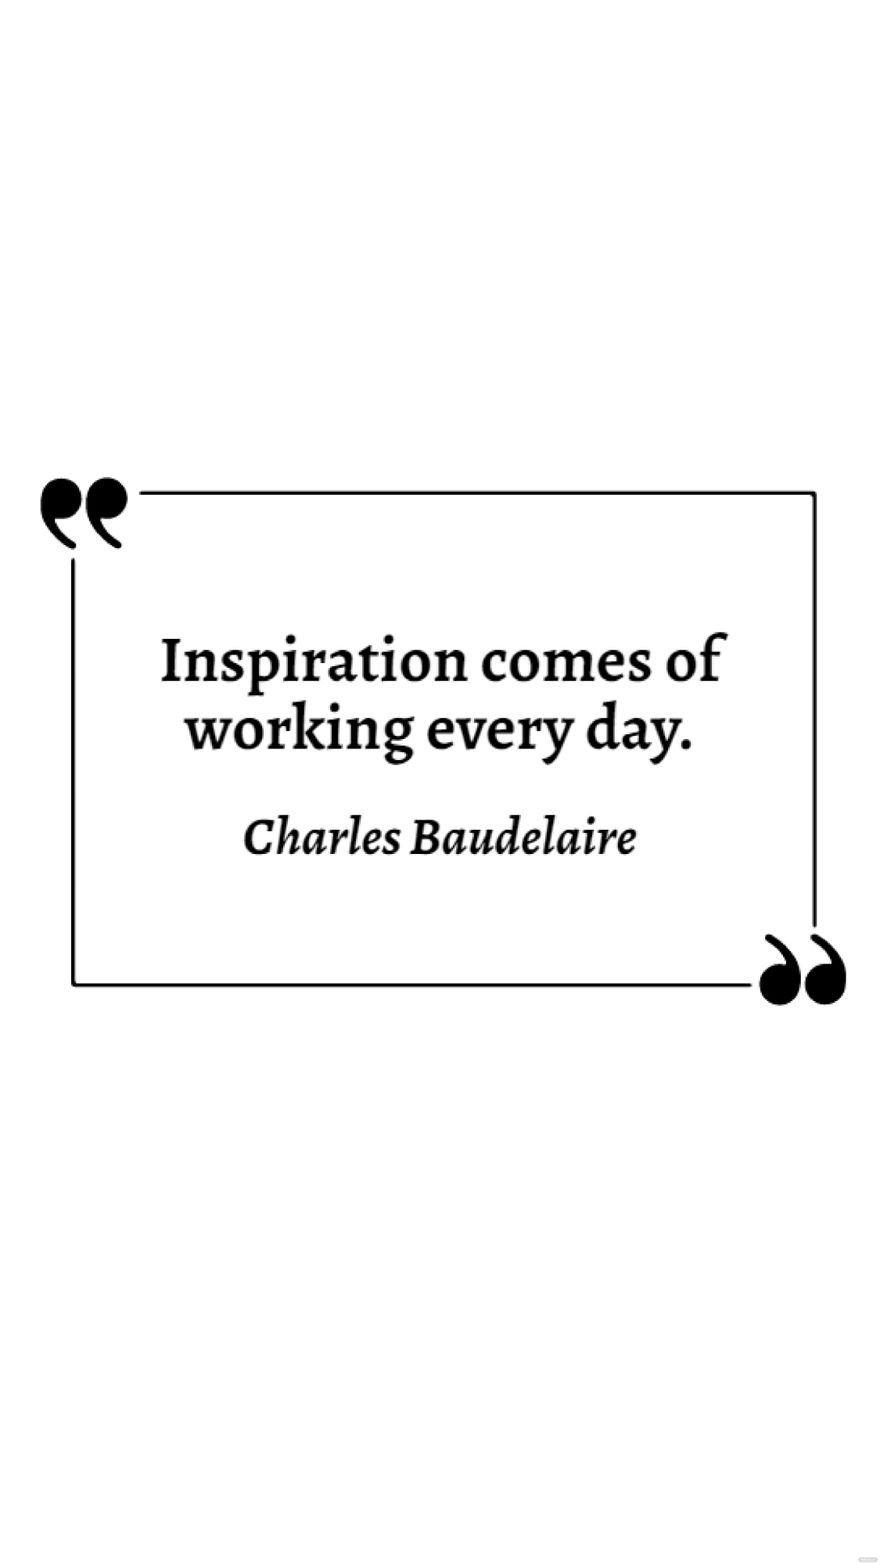 Charles Baudelaire - Inspiration comes of working every day. in JPG